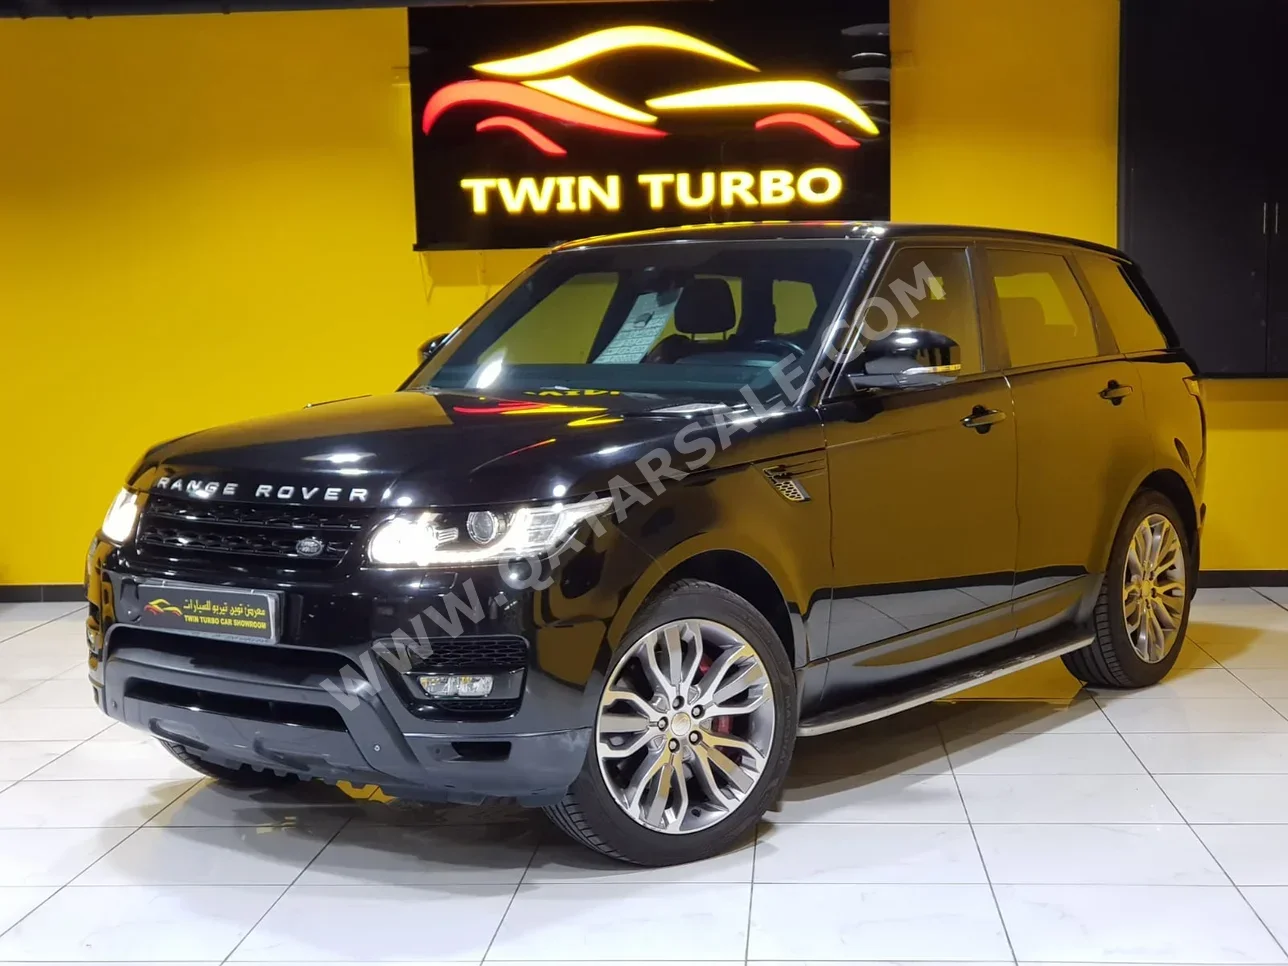 Land Rover  Range Rover  Sport Super charged  2014  Automatic  108,000 Km  8 Cylinder  Four Wheel Drive (4WD)  SUV  Black